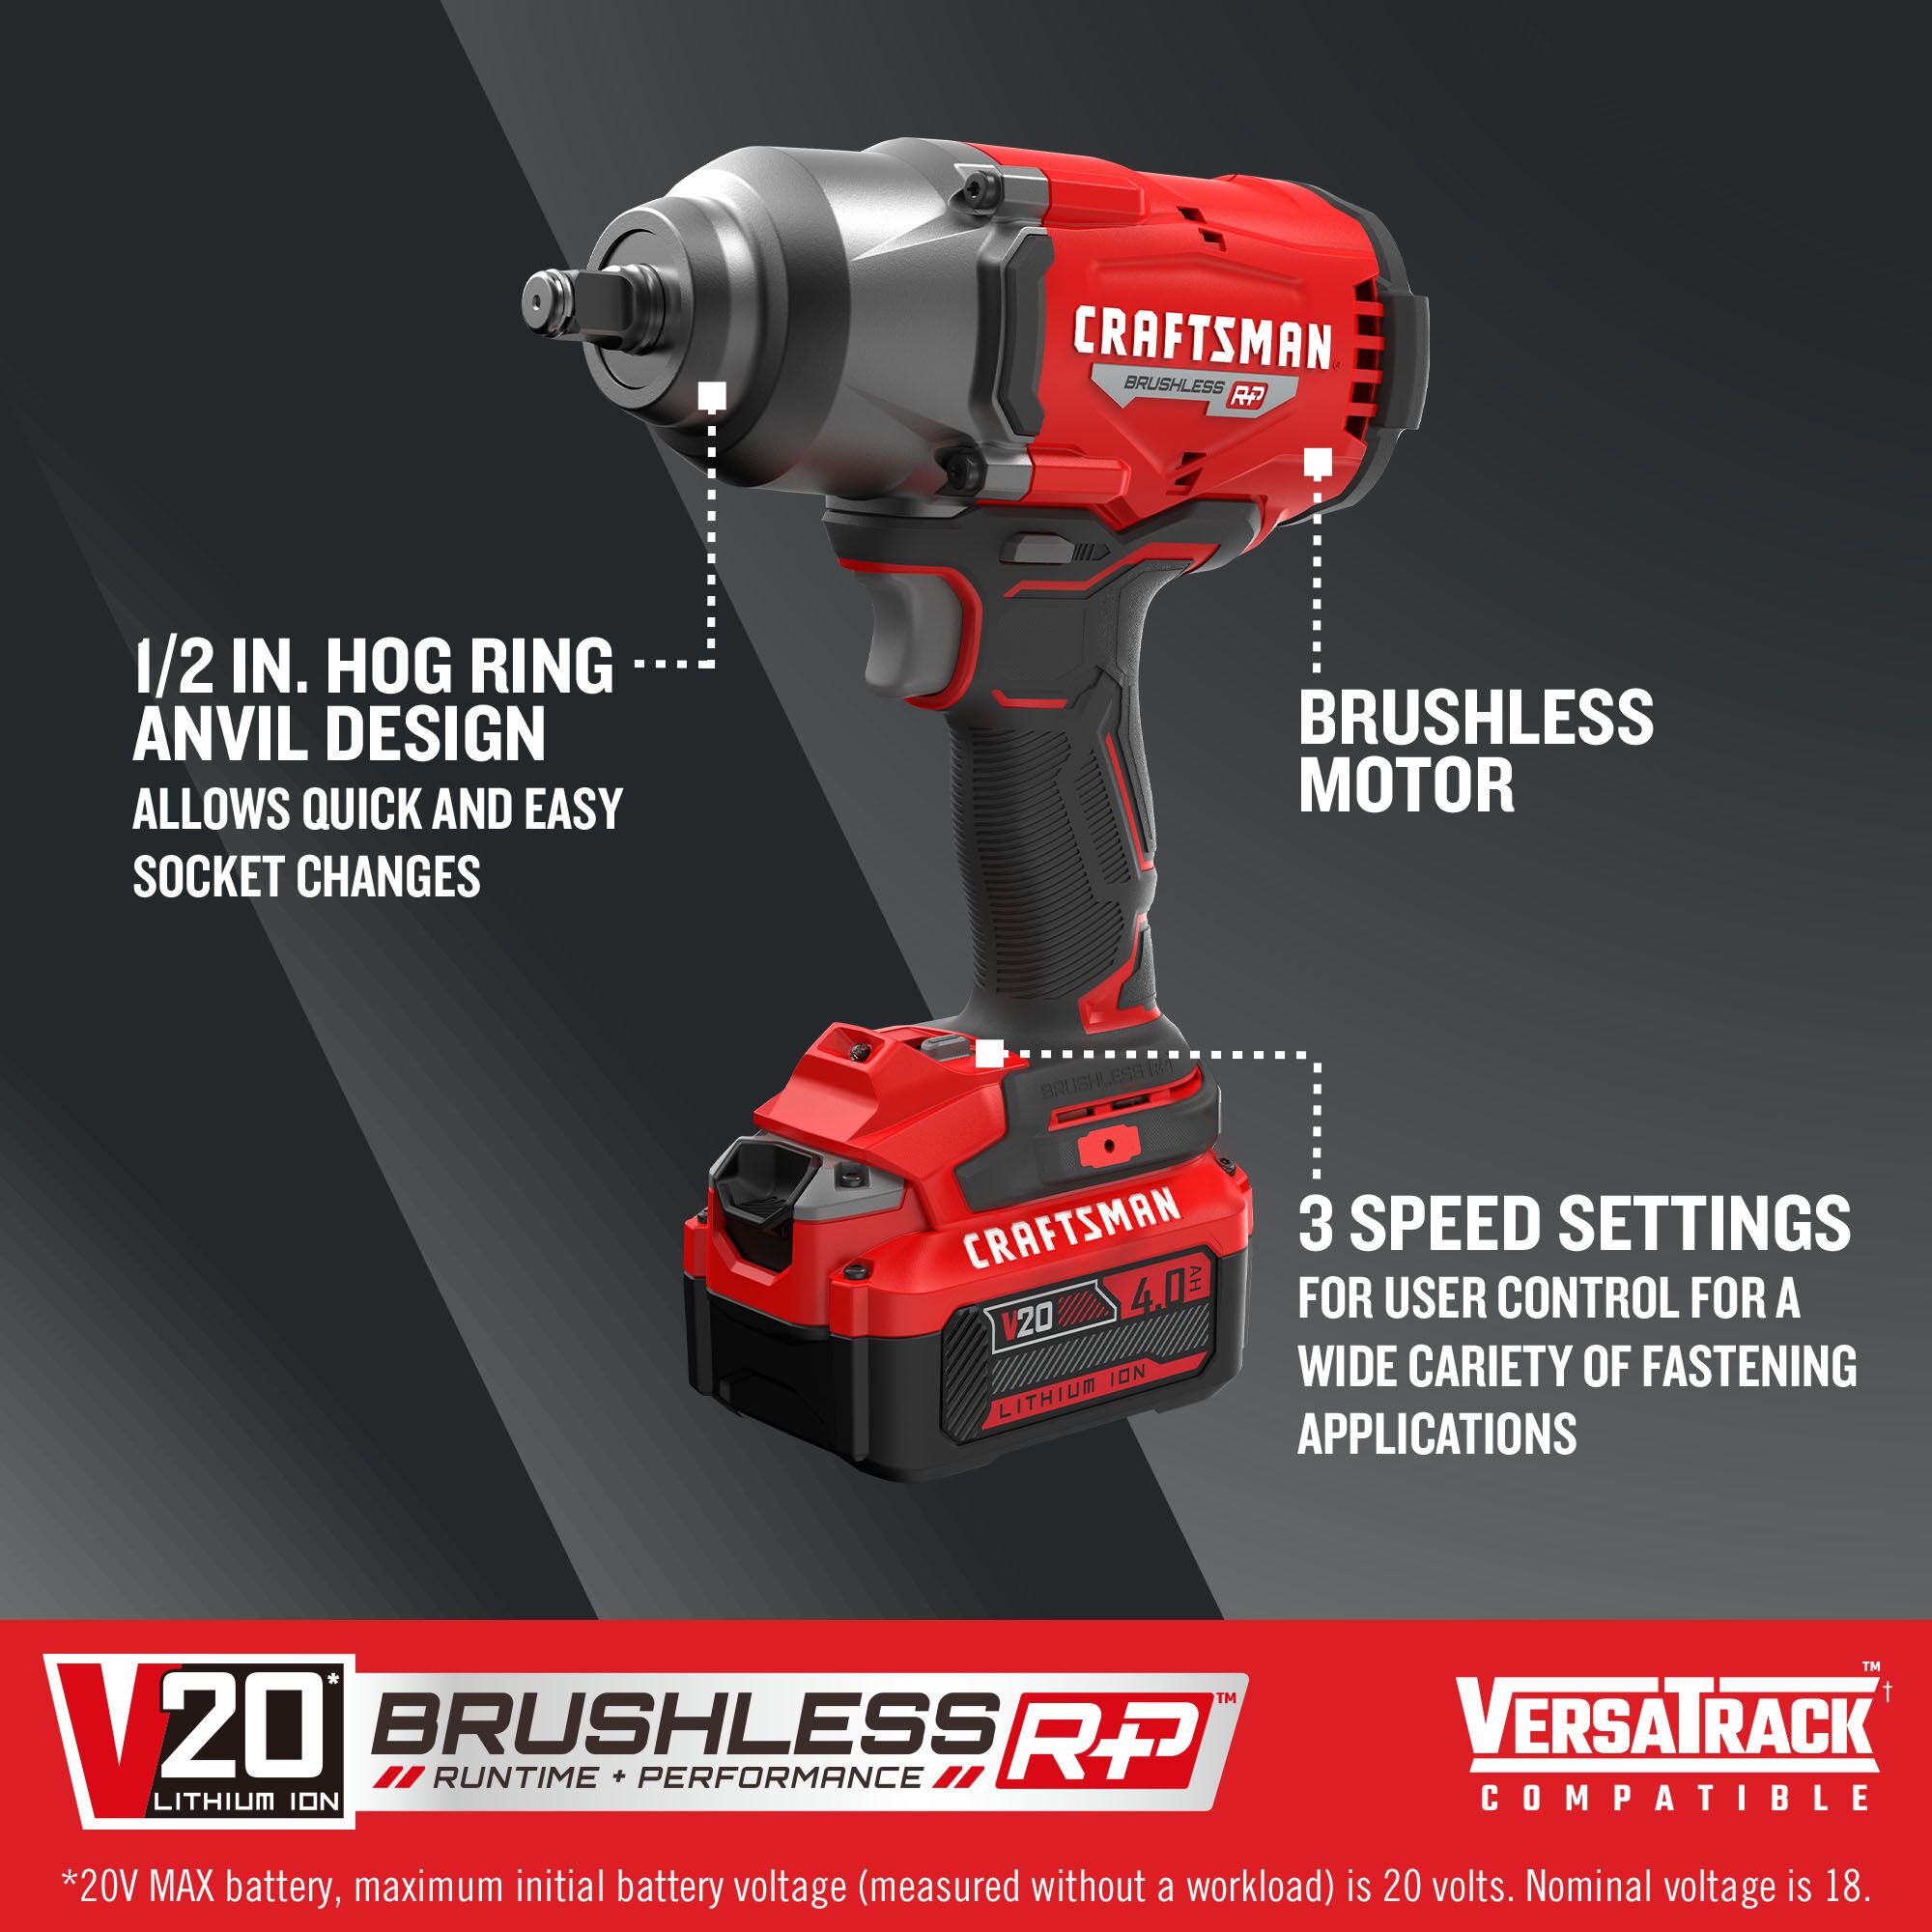 CRAFTSMAN BRUSHLESS RP high torque half inch drive impact wrench on dark background graphic